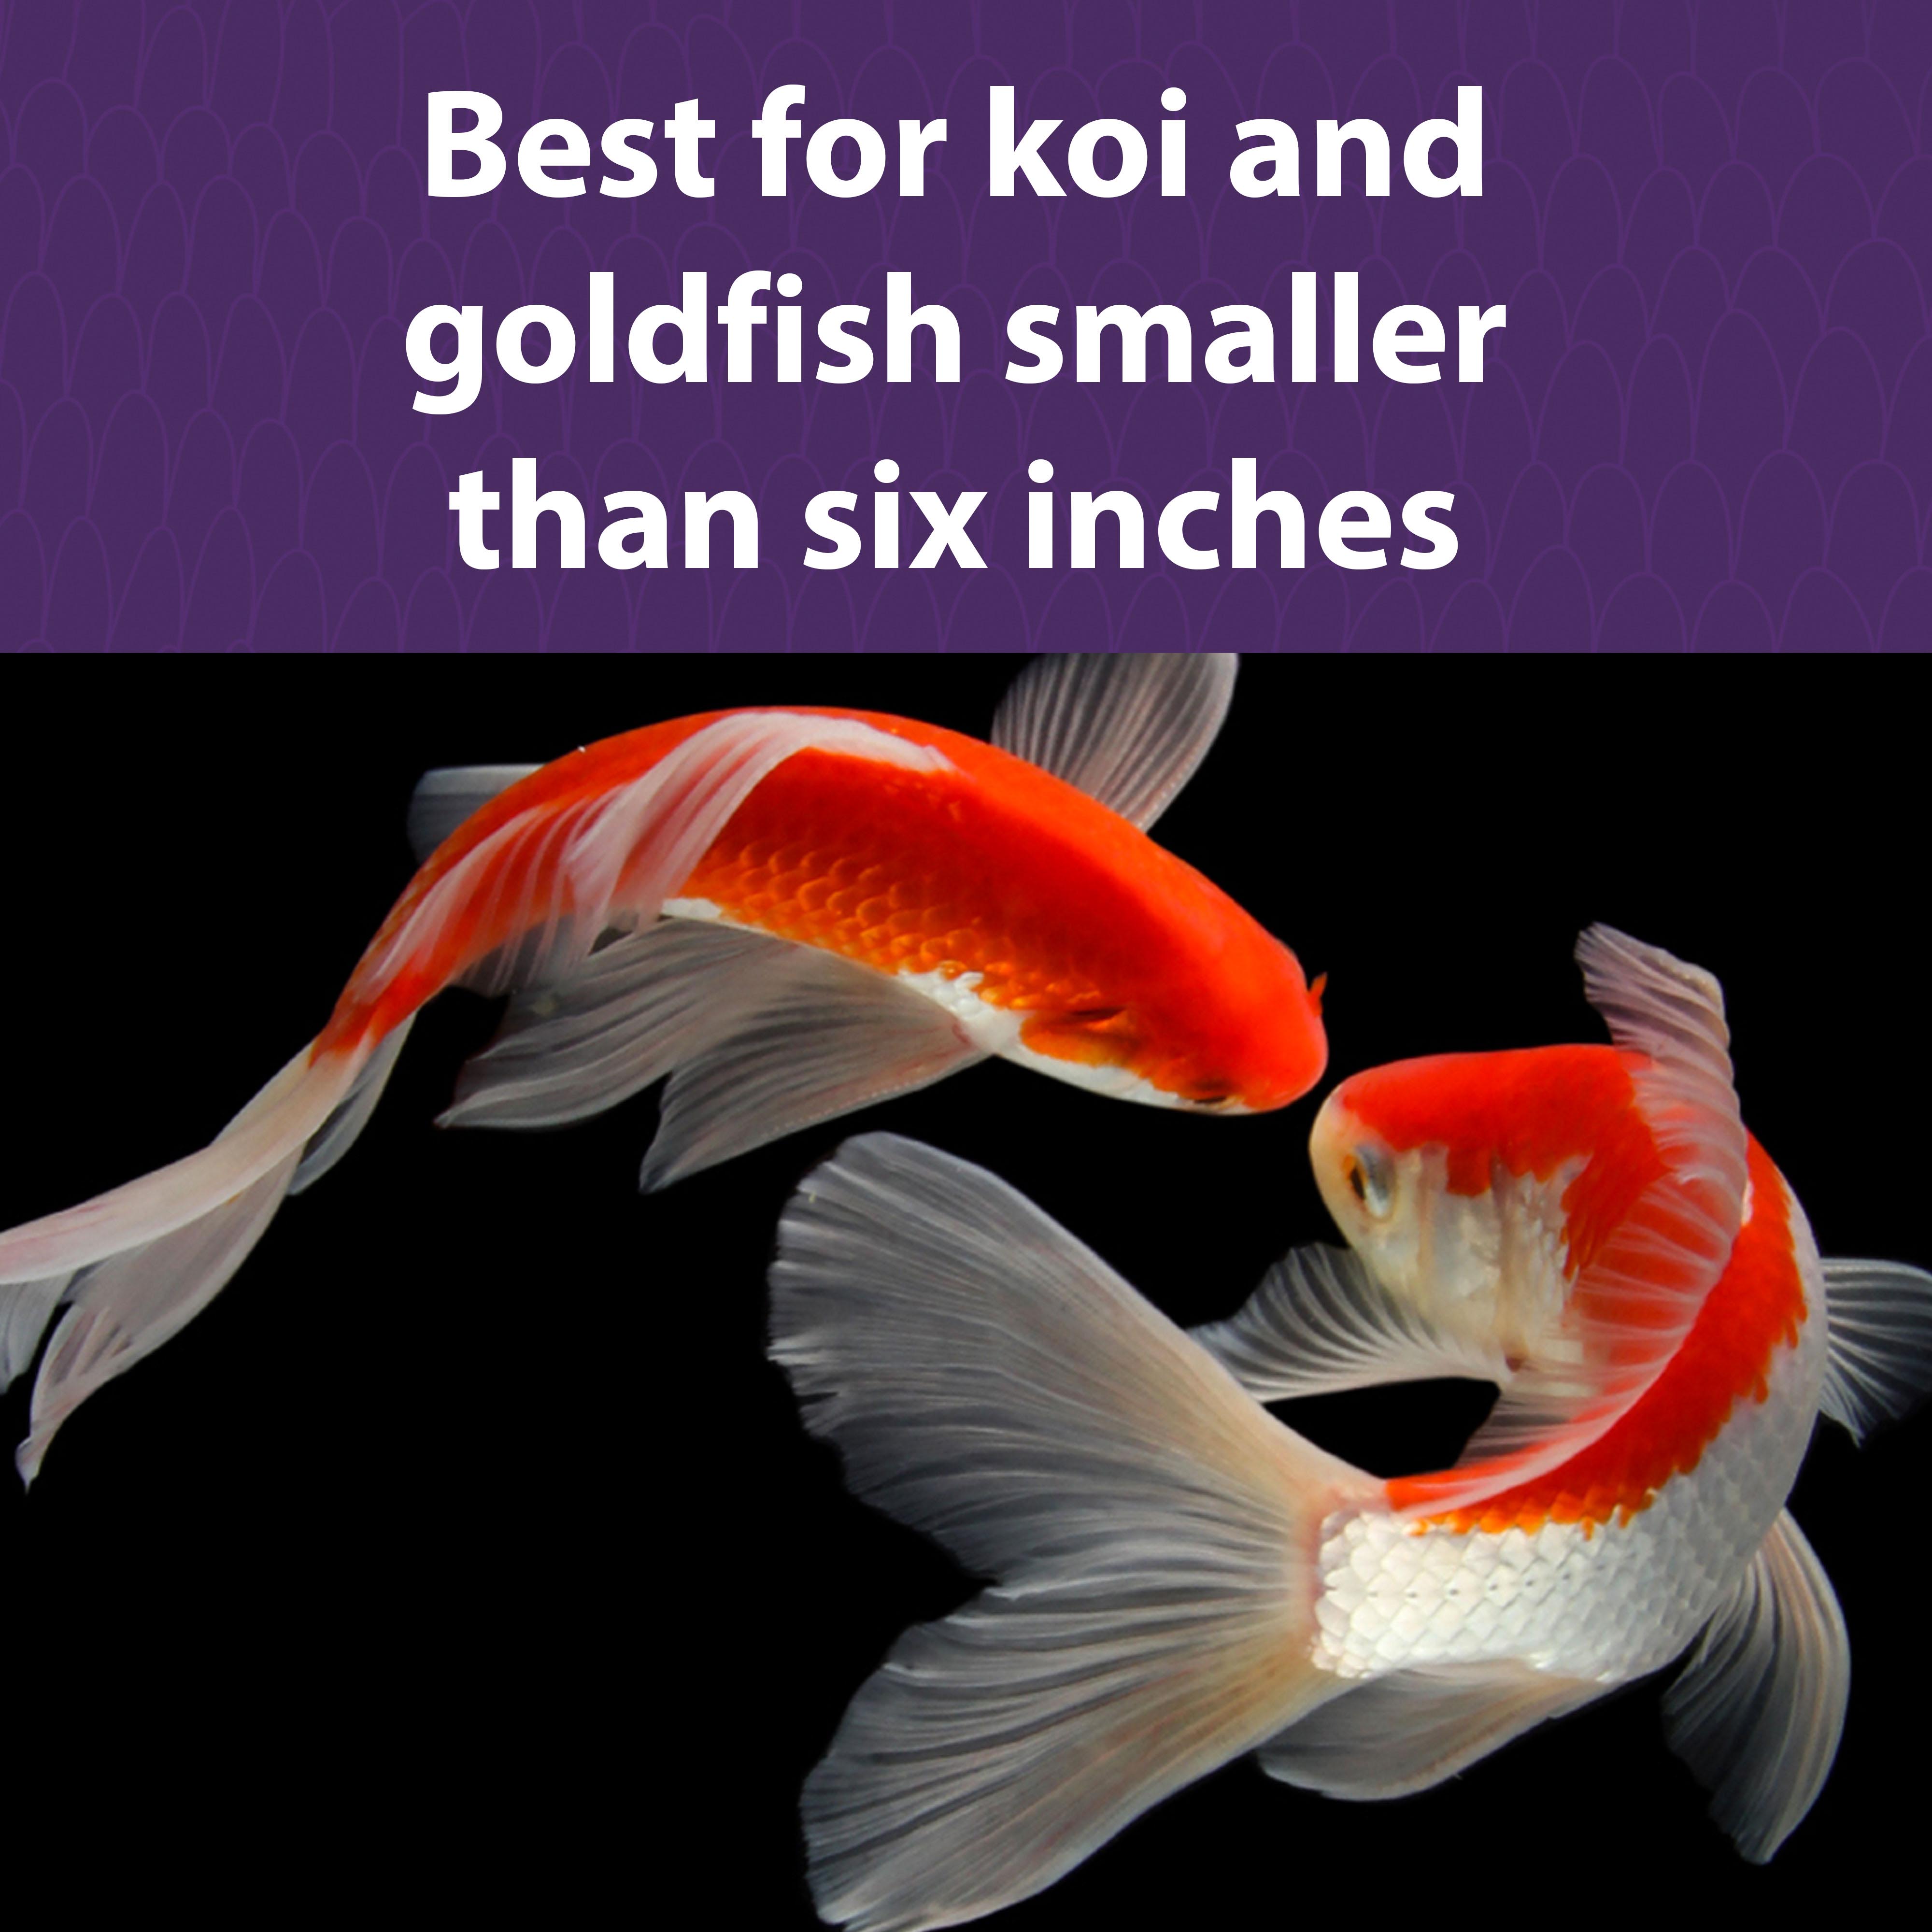 Best for Koi and goldfish smaller than 6 inches